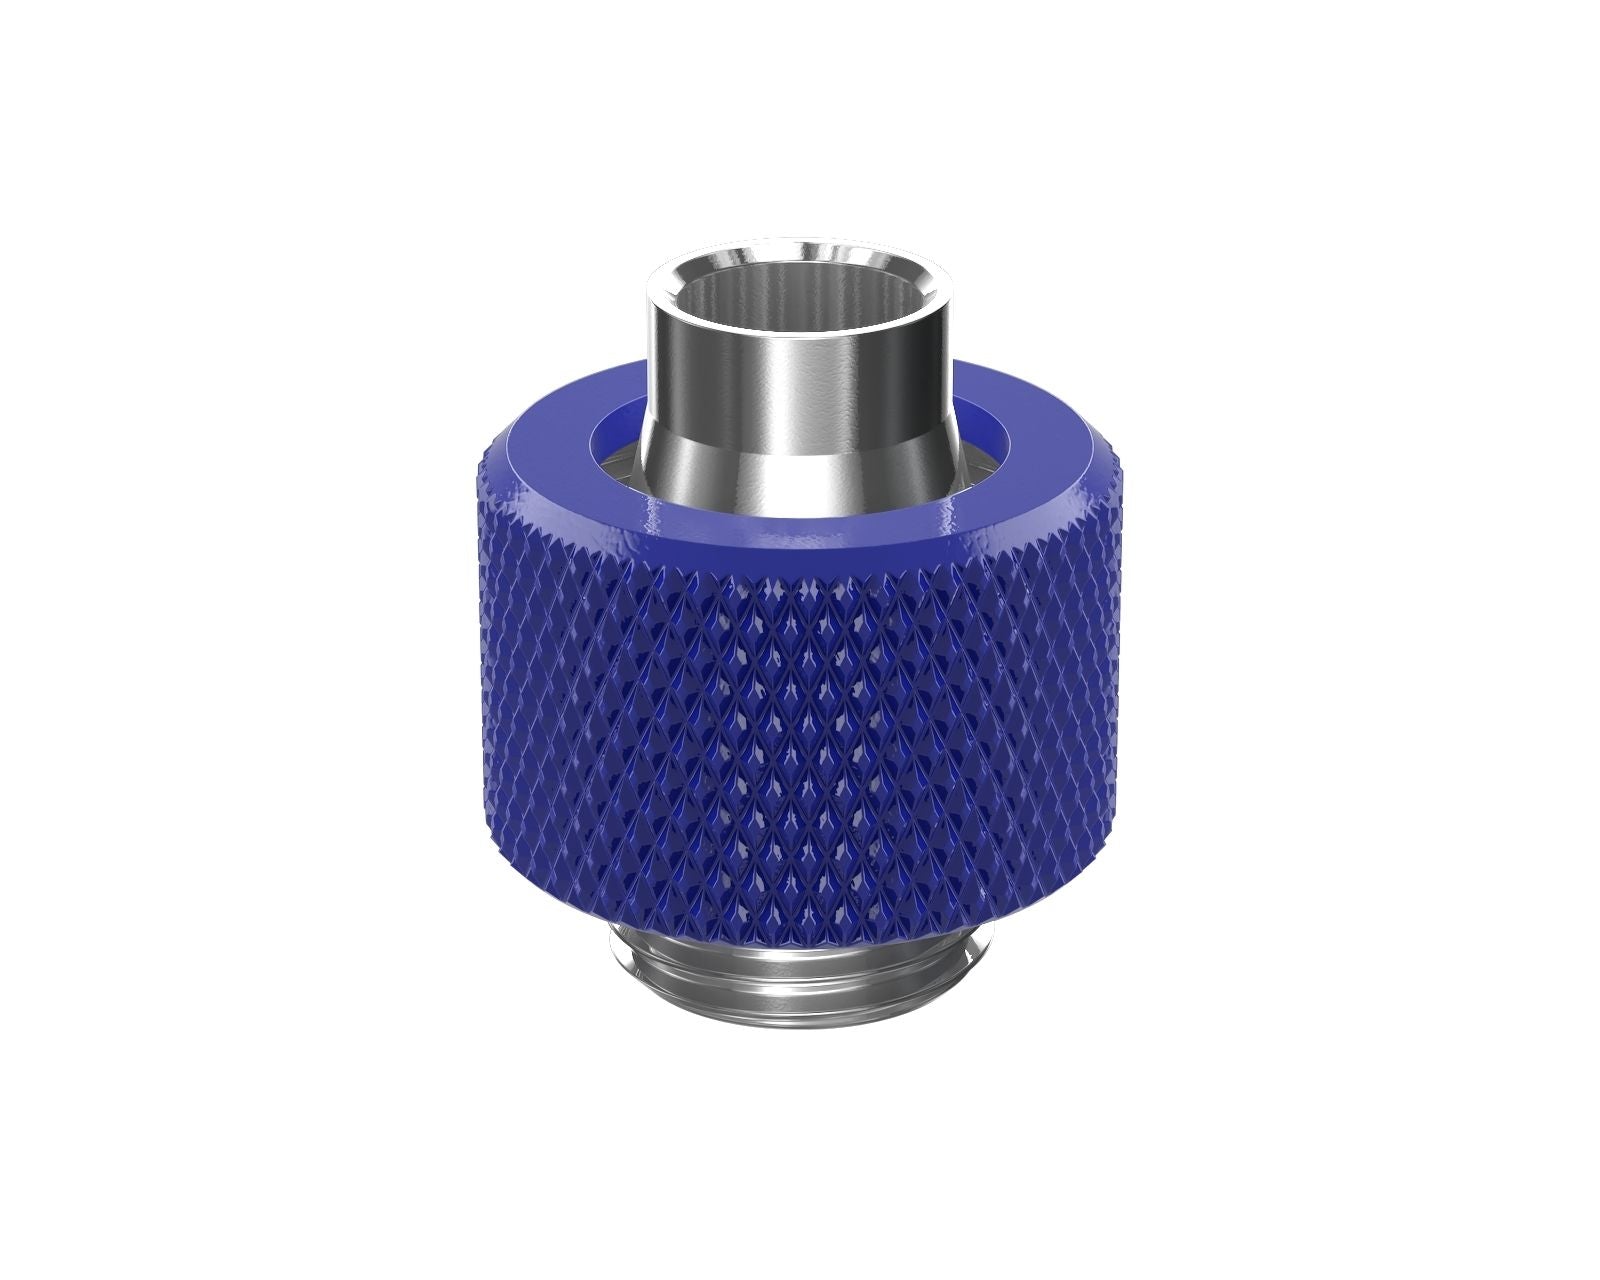 PrimoChill SecureFit SX - Premium Compression Fitting For 3/8in ID x 1/2in OD Flexible Tubing (F-SFSX12) - Available in 20+ Colors, Custom Watercooling Loop Ready - True Blue